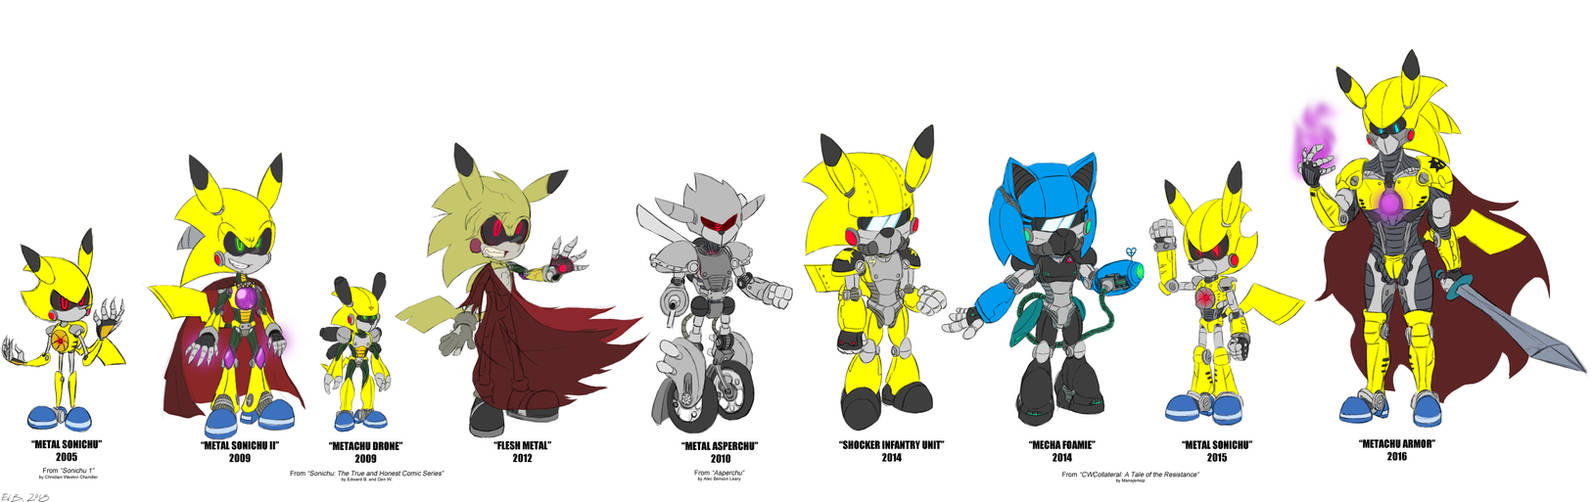 THE NEW METAL SONIC CHROME DINO TEXTURES! by Sheriff234 on DeviantArt